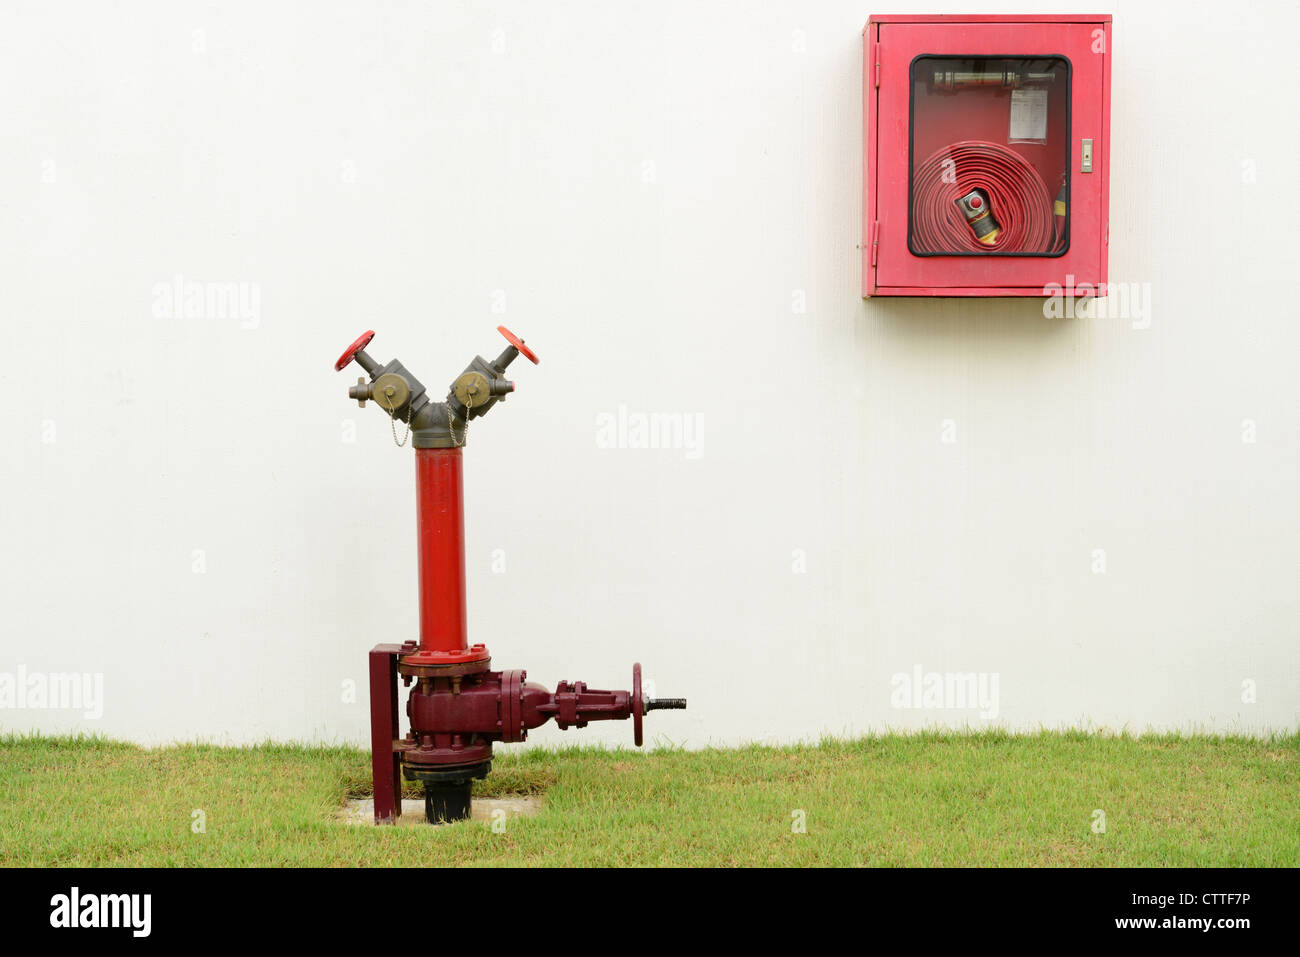 The red fire hydrant and fire hose next to the building Stock Photo